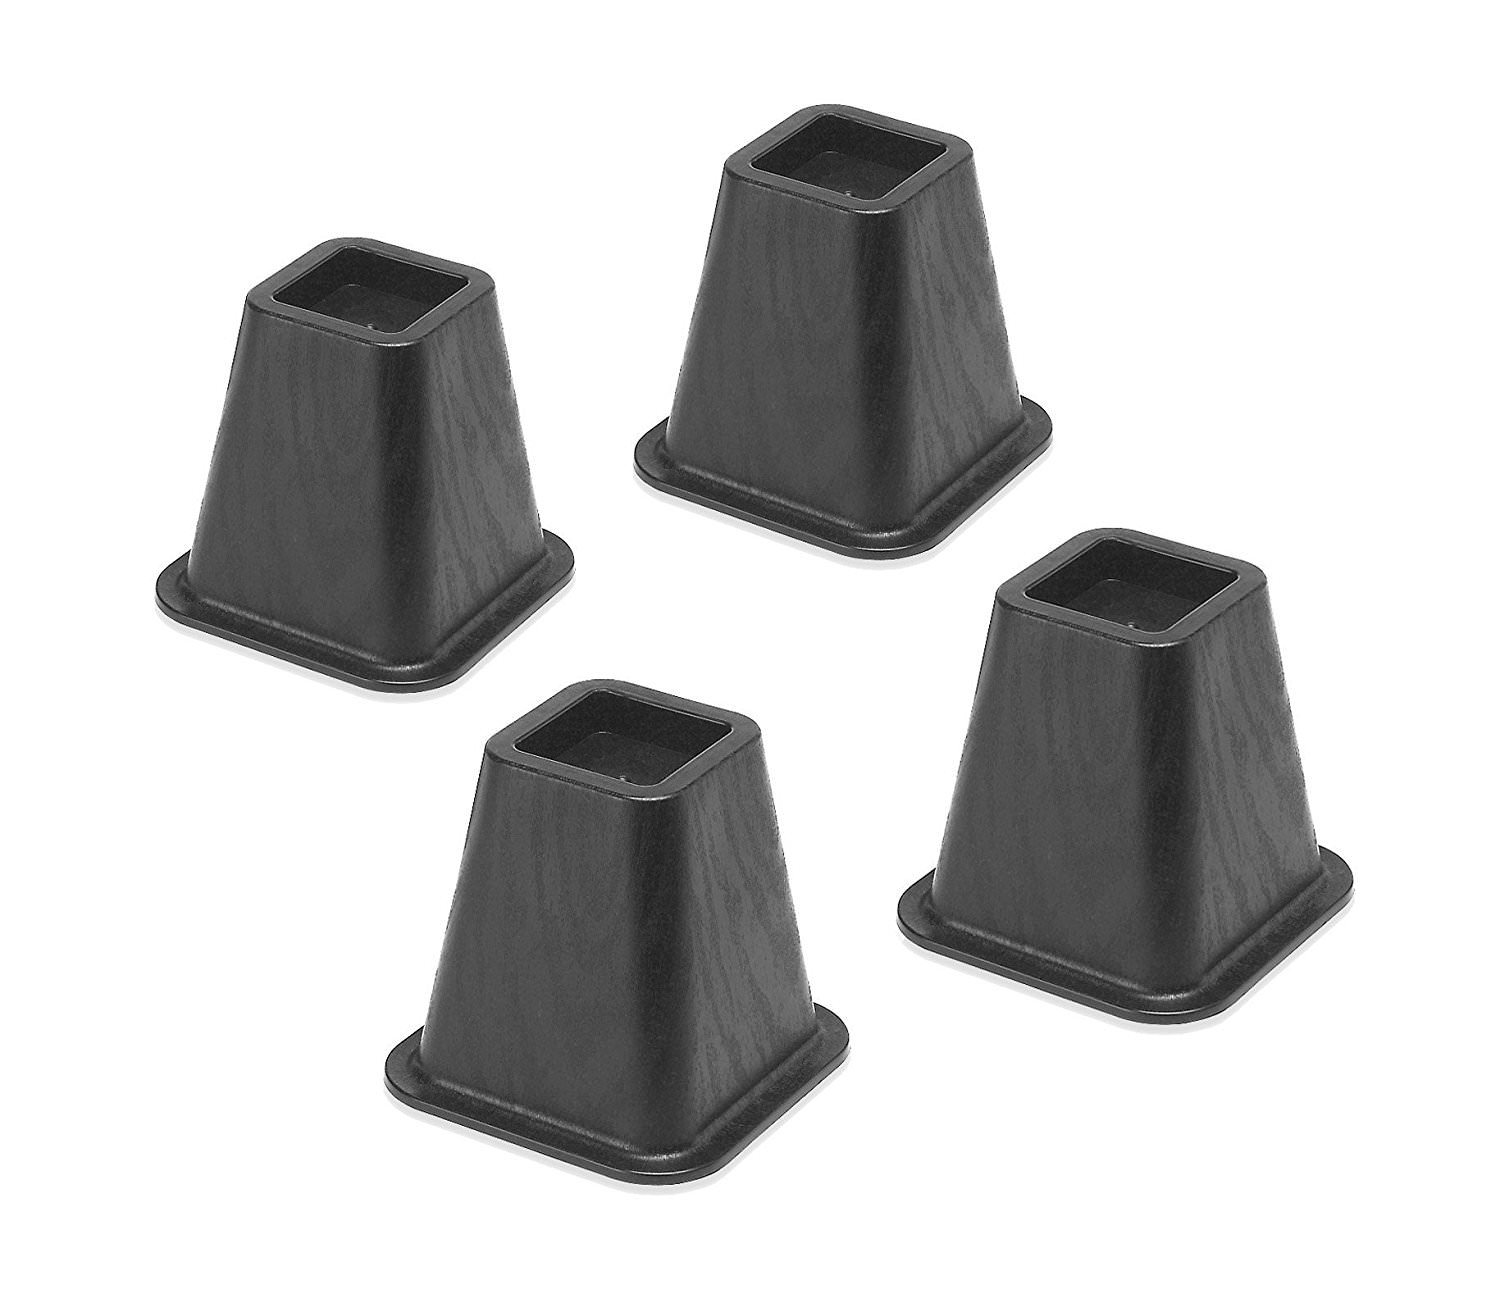 Whitmor Underbed Storage Bed & Furniture Risers - Set of 4 - Black - 6.375" x 6.375" x 6.0" - image 1 of 6